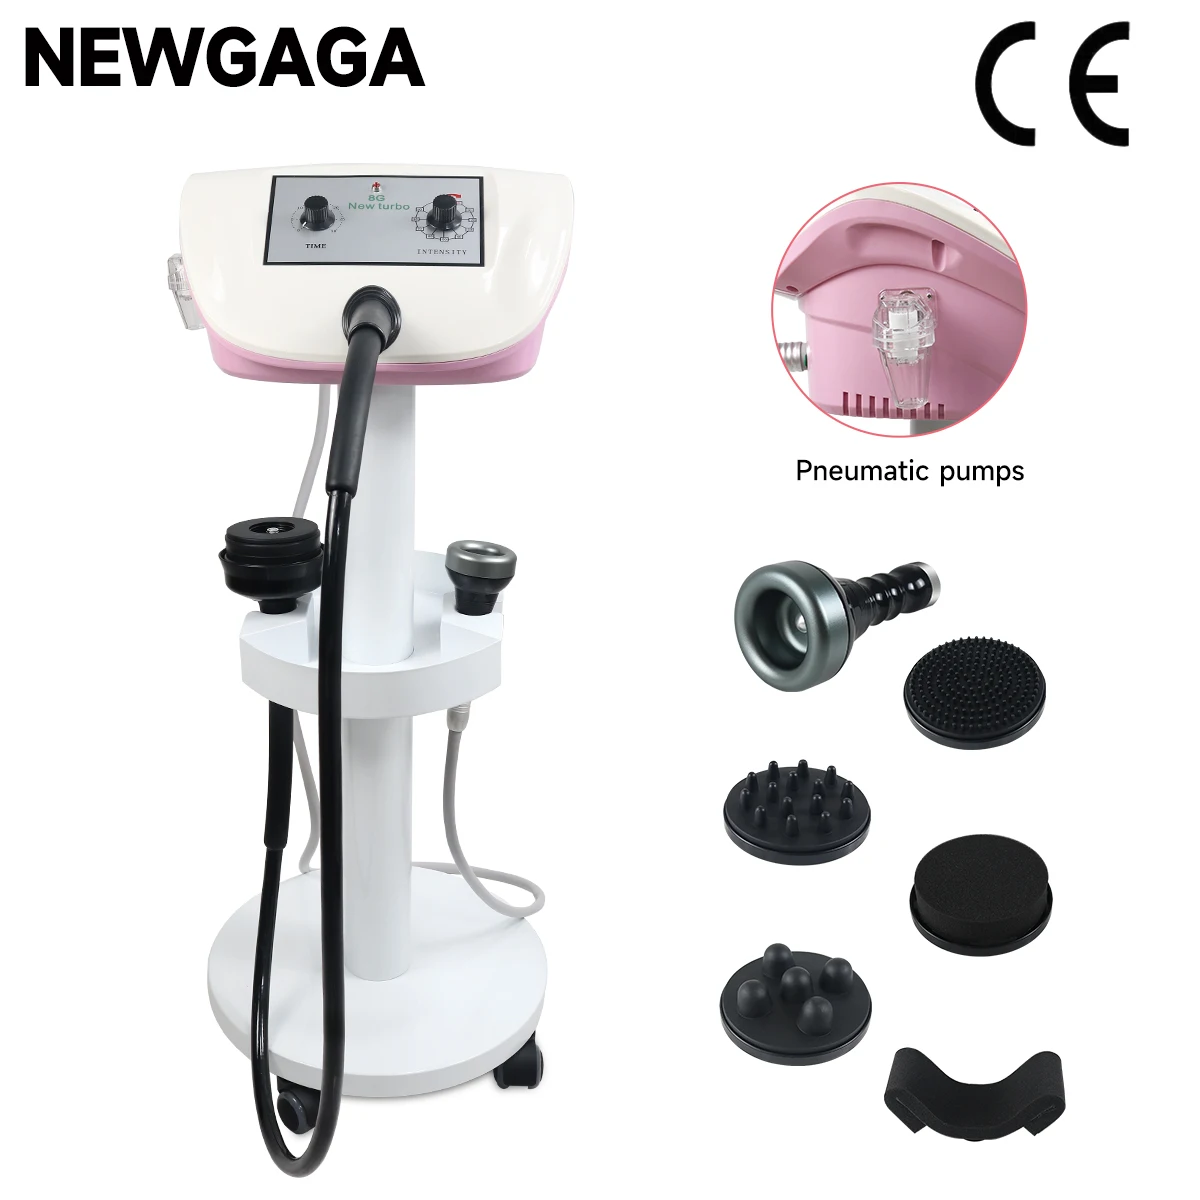 

NEWGAGA High Frequency G5 Vibrating Body Slimming Machine Fitness Cellulite Fat Reduce Shaping Massager Weight Loss Waist Device